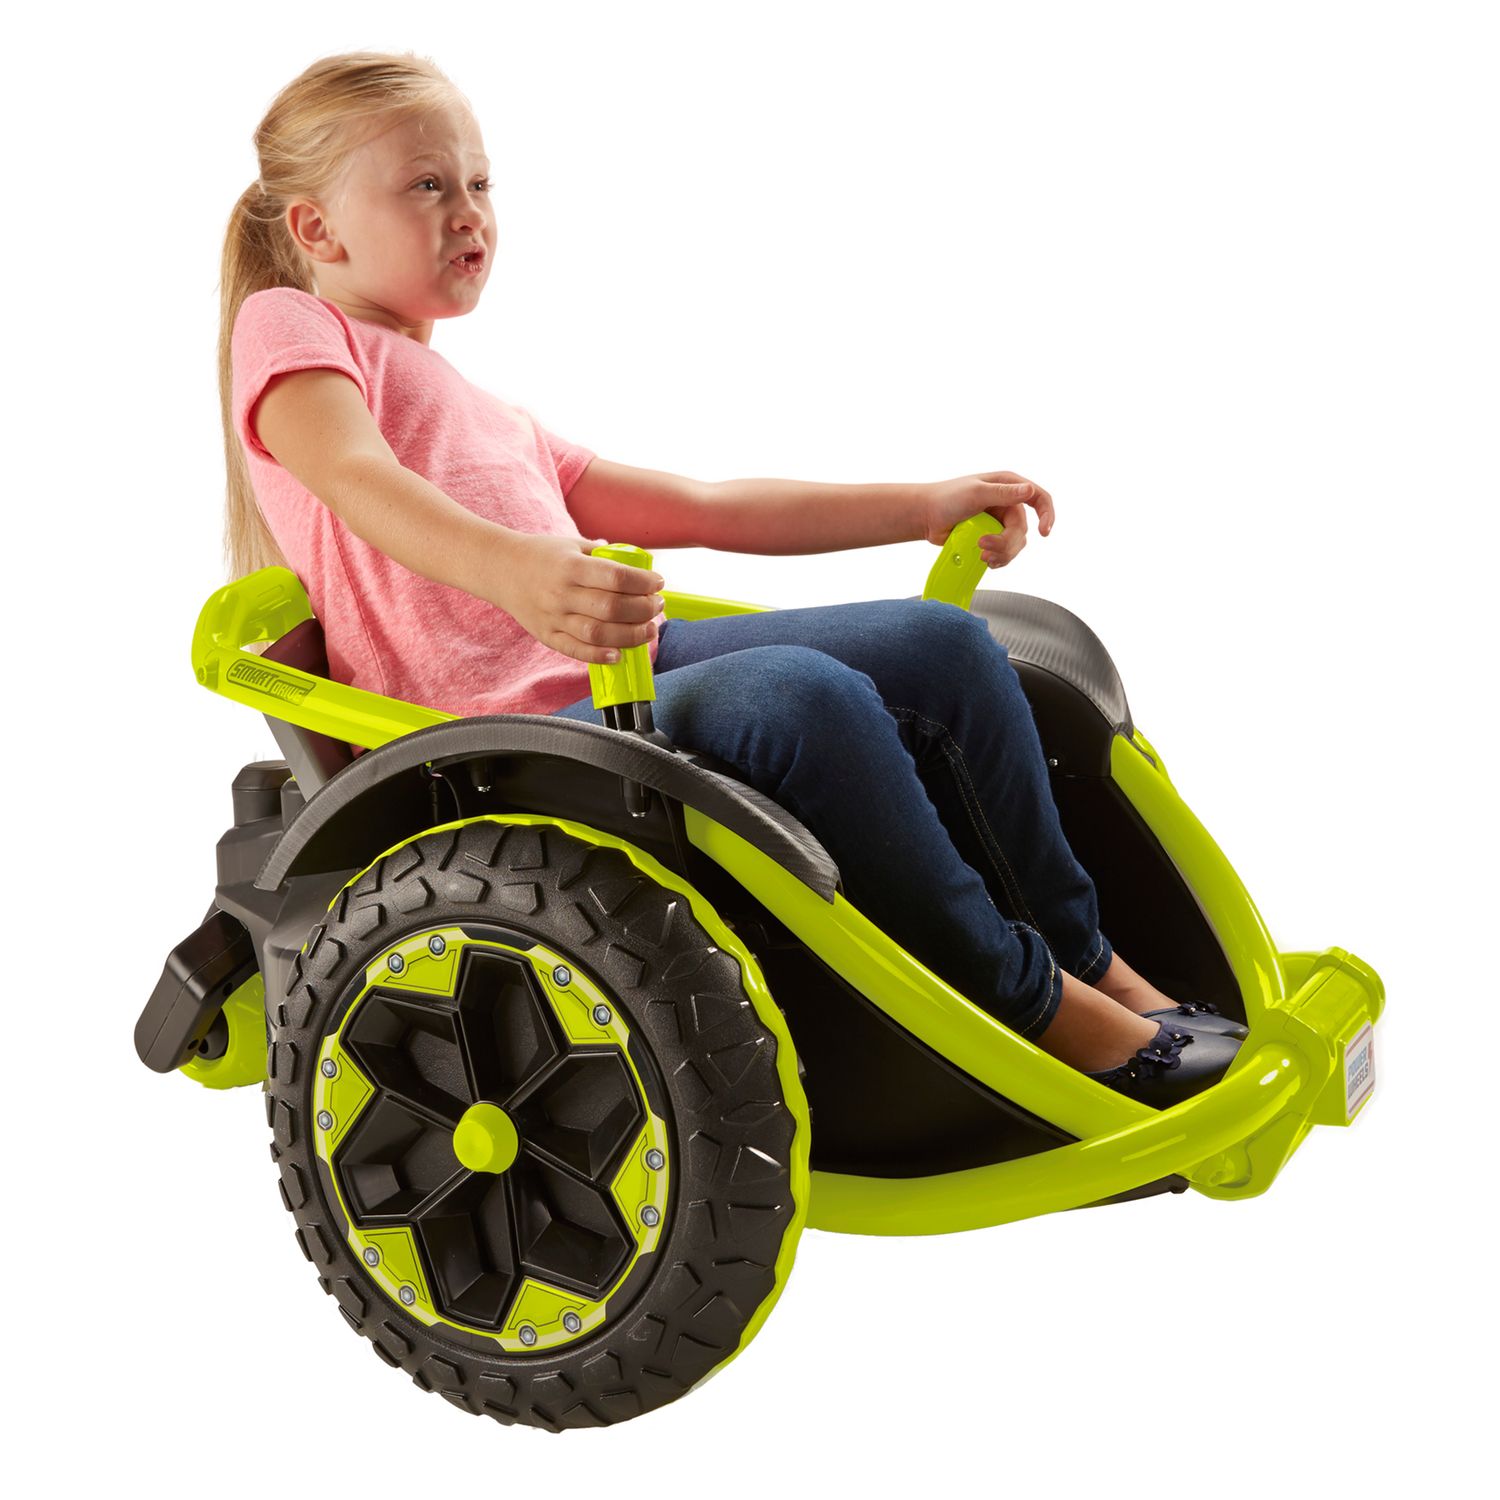 power wheels up to 100lbs